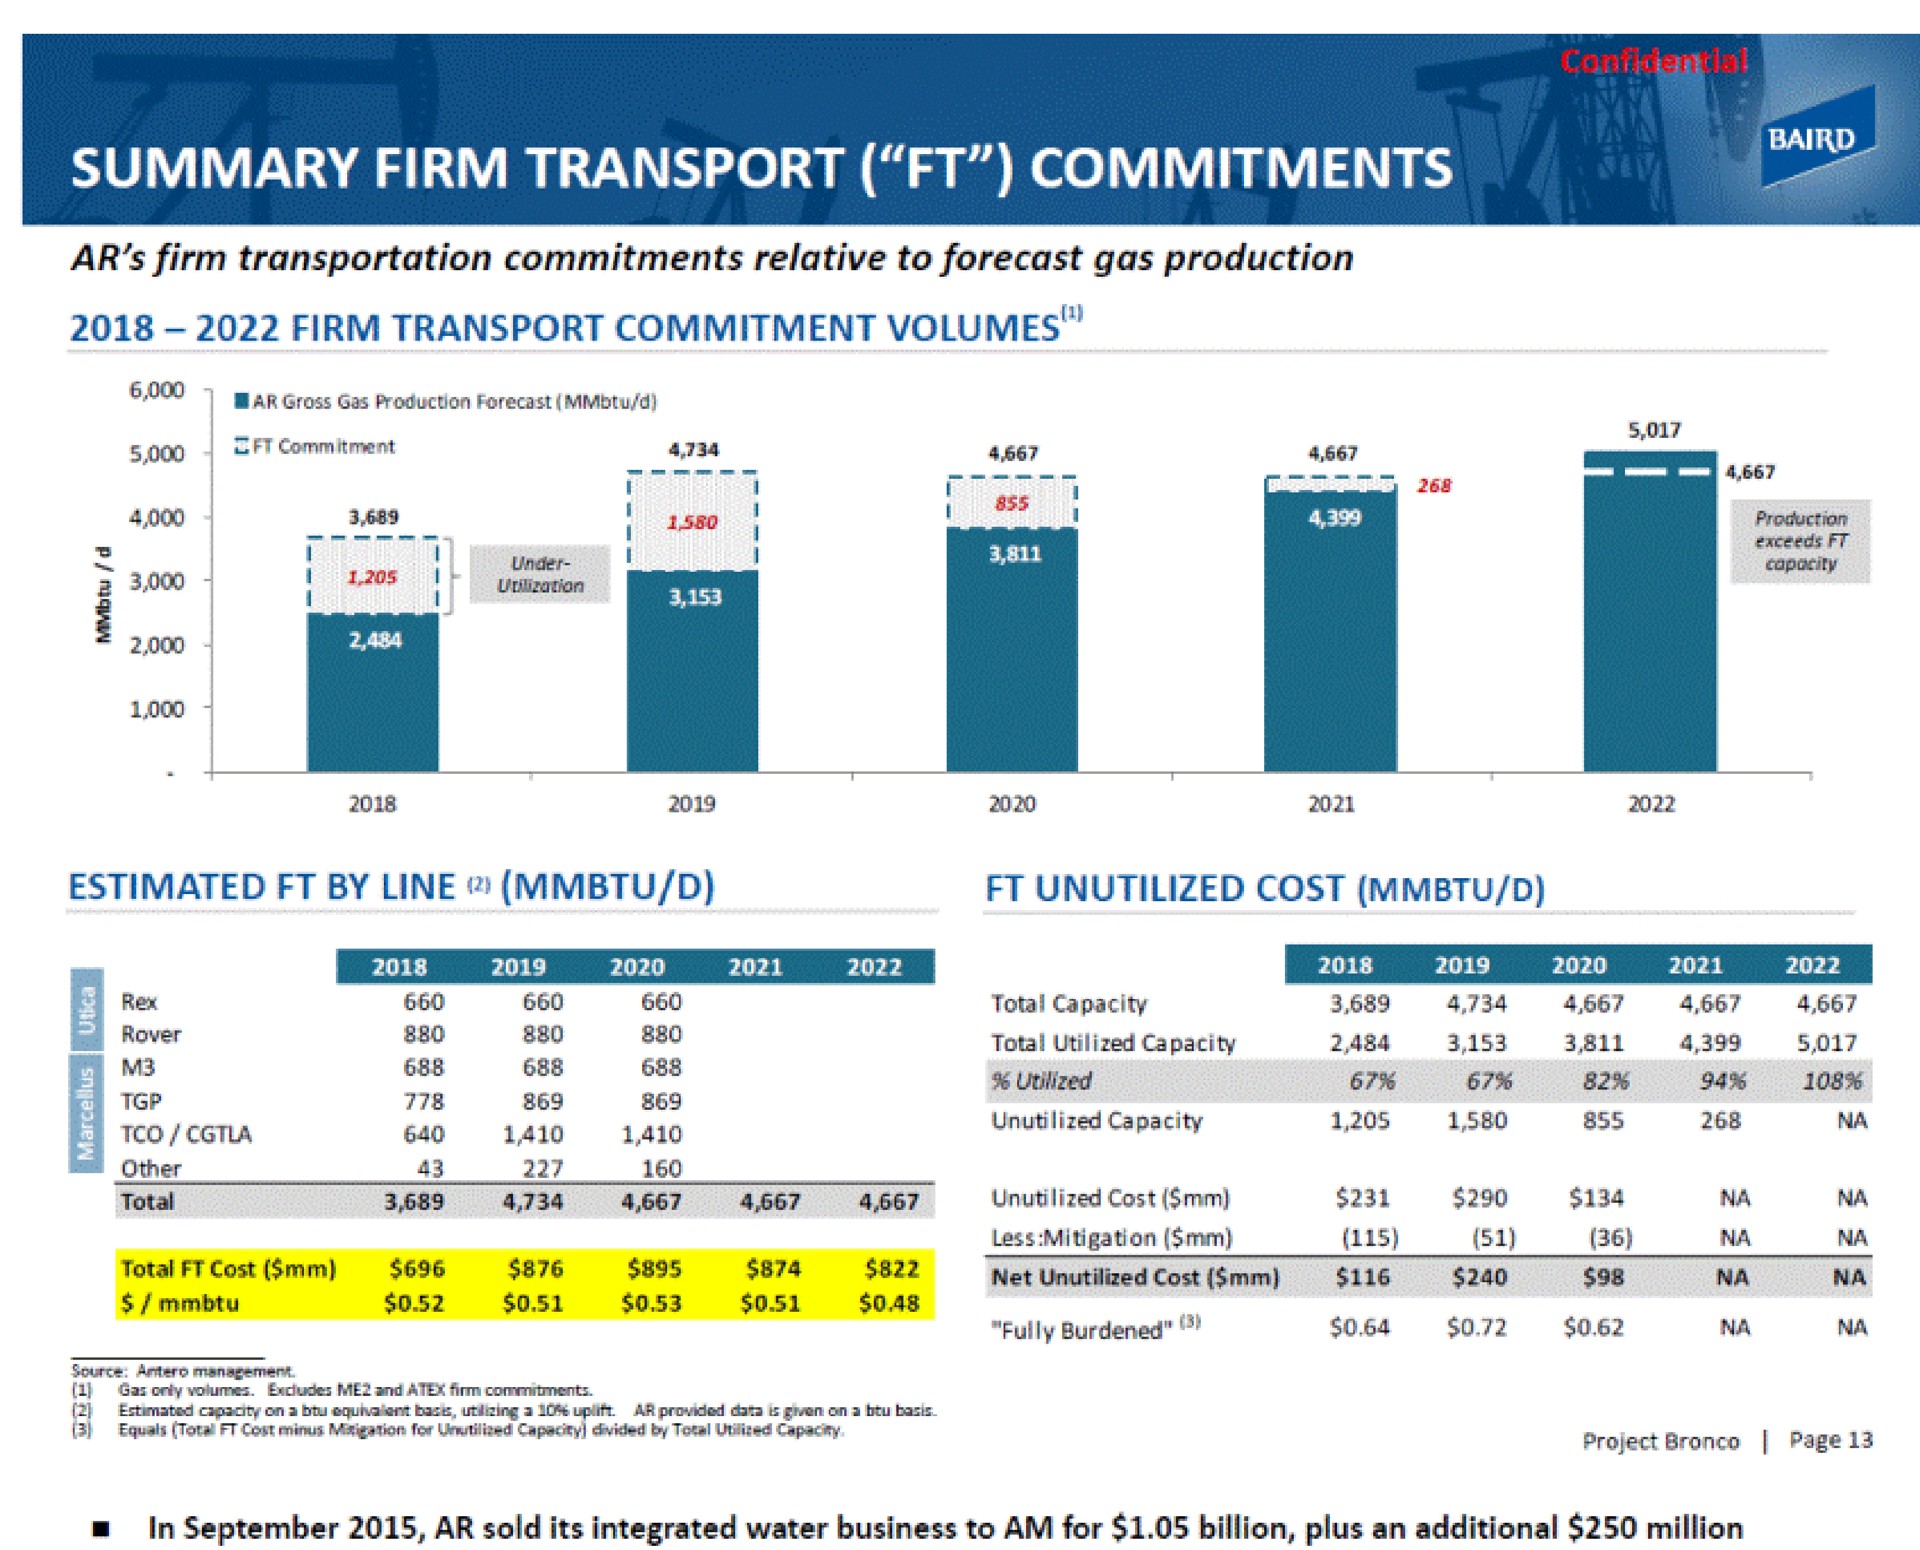 summary firm transport commitments | Baird